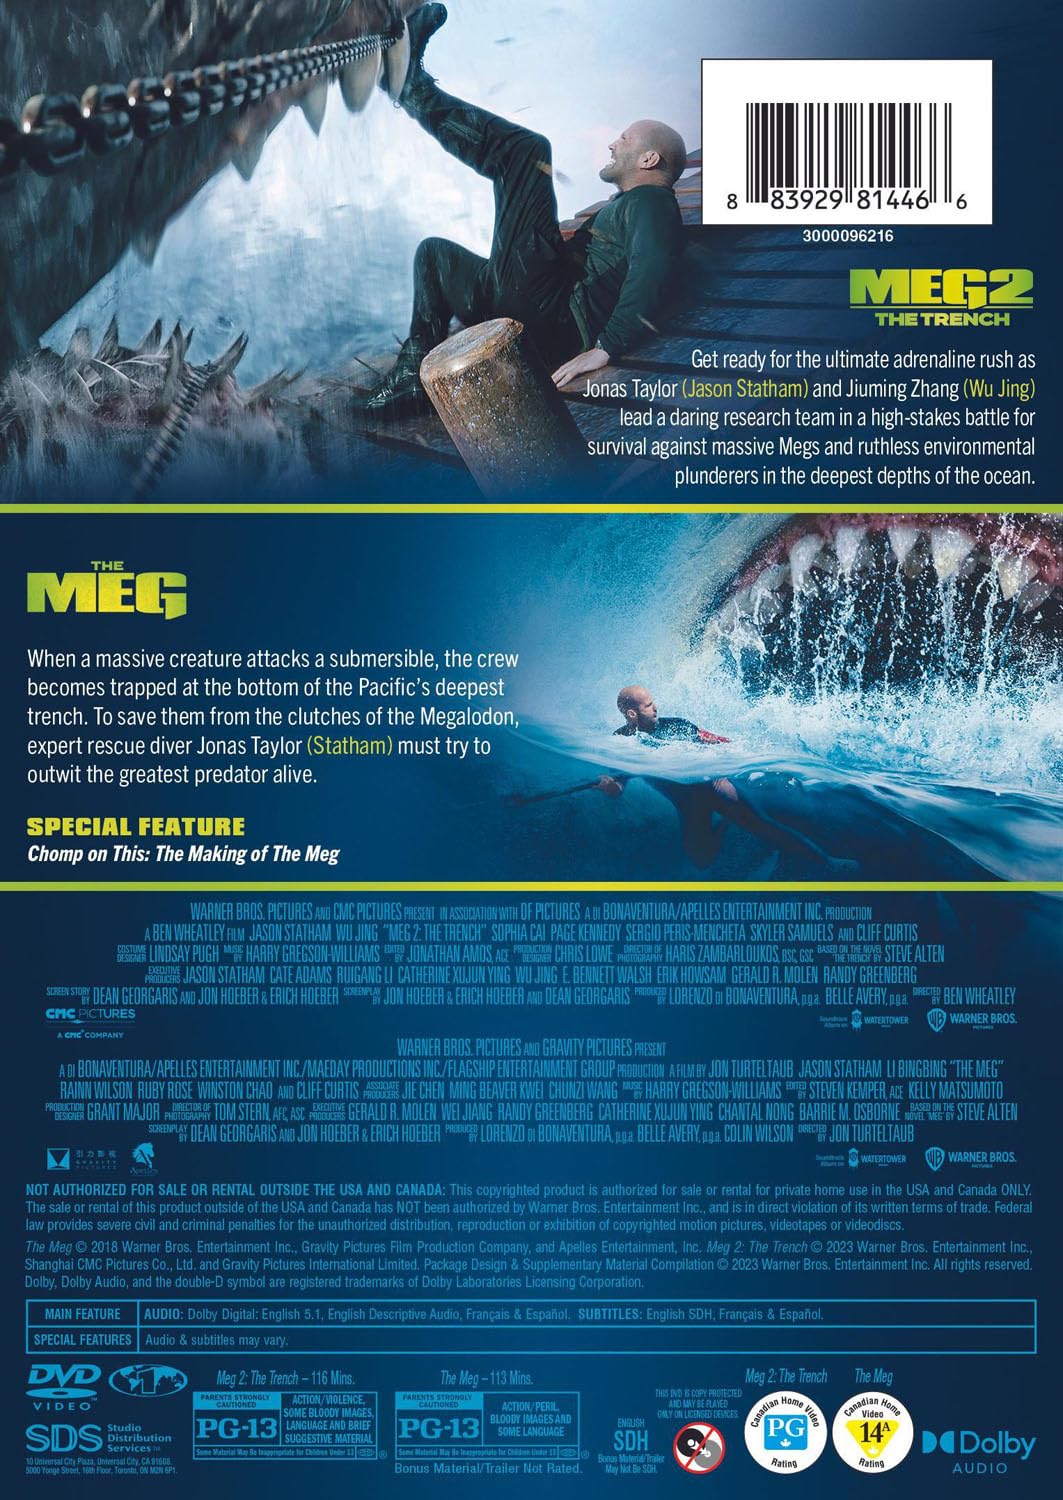 The Meg 2-Film Collection (DVD)